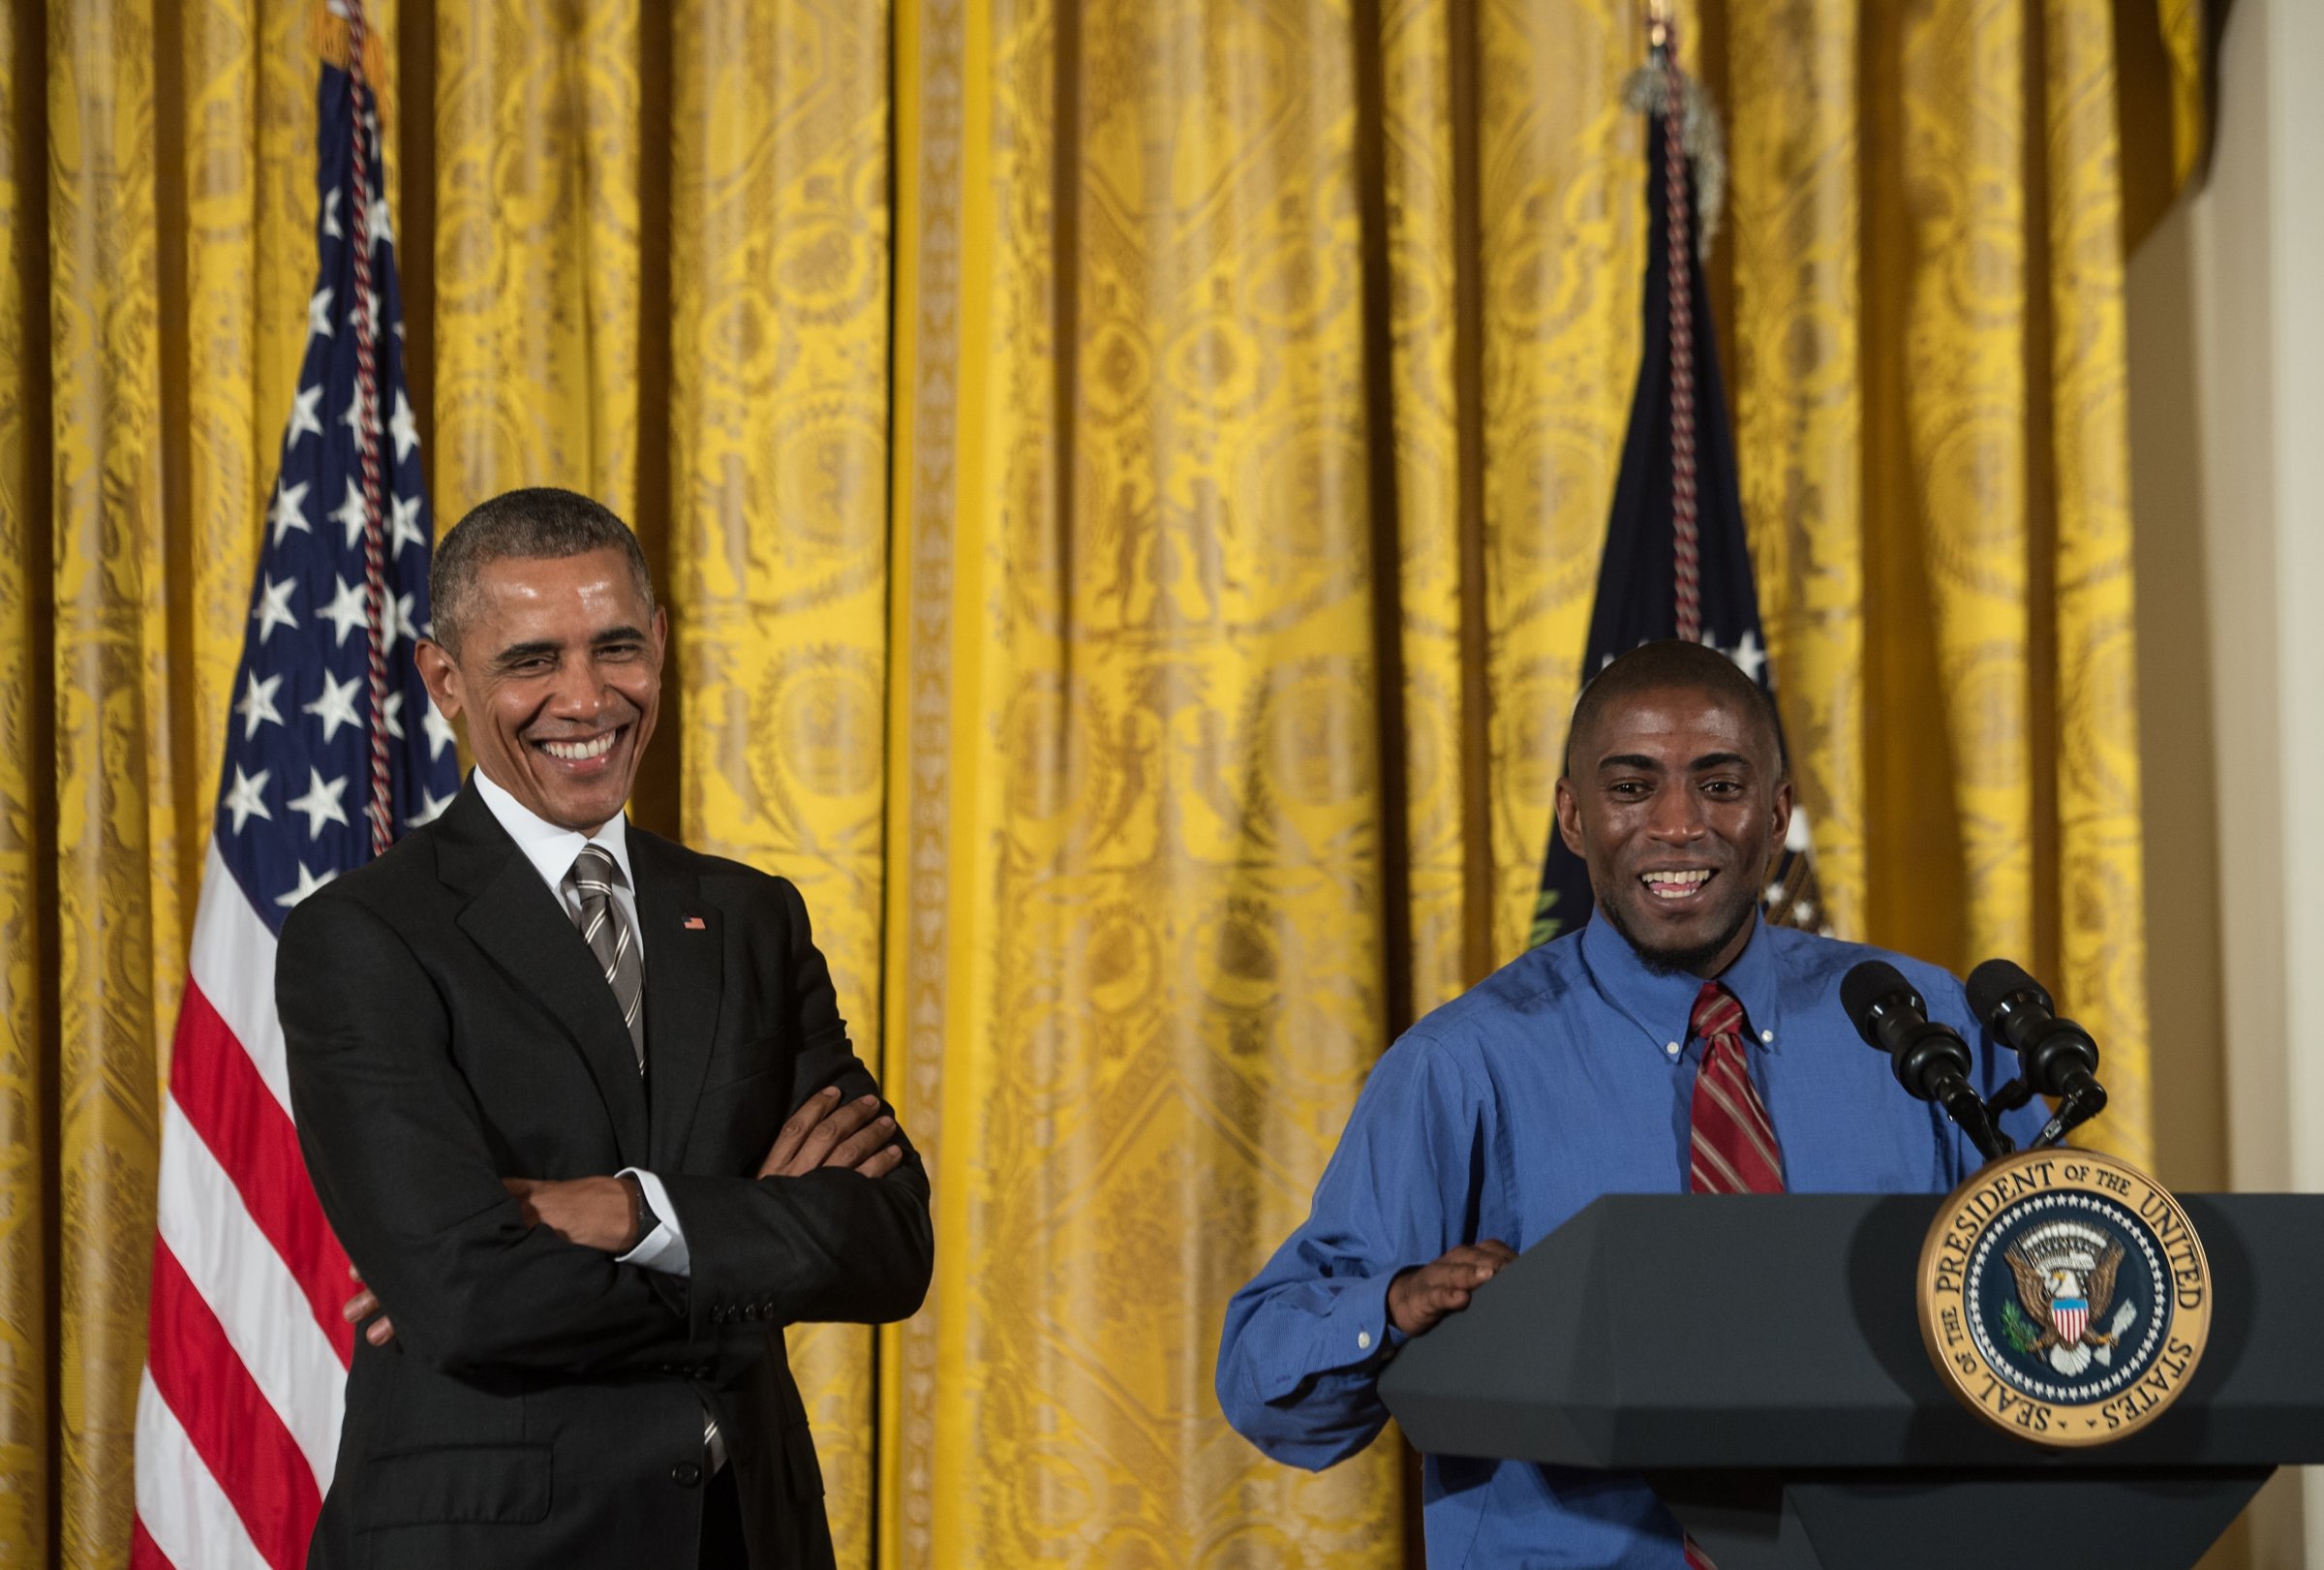 US President Barack Obama (L) smiles as he is introduced by fast food worker Terrence Wise at the Summit on Worker Voice at the White House in Washington, DC, on Oct. 7, 2015.